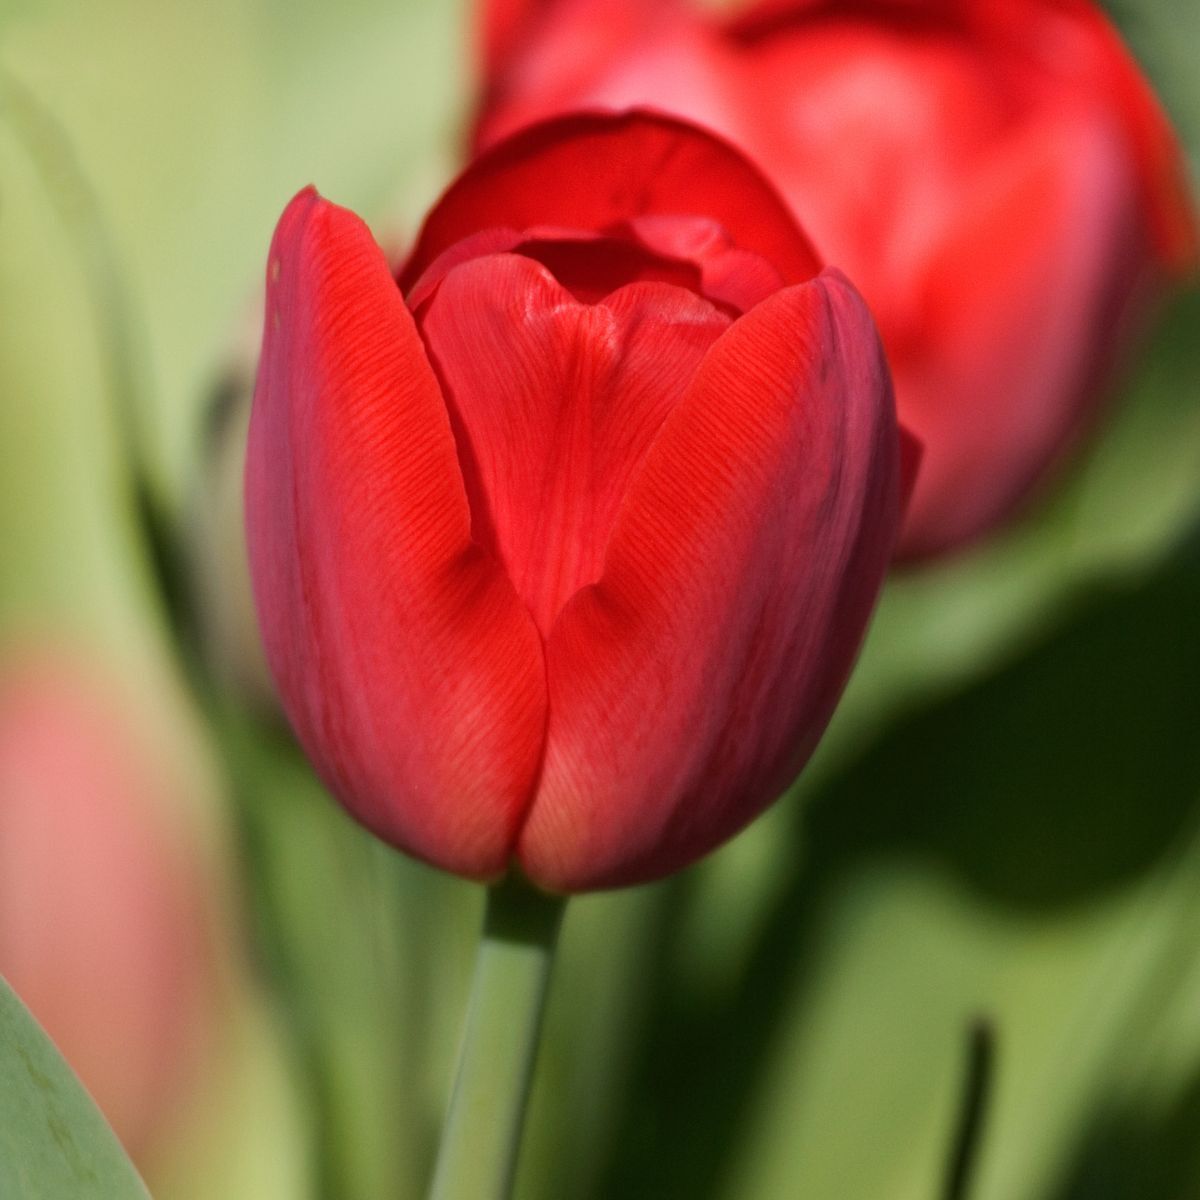 a single red tulip flower bud, Tulipa, opening in the spring